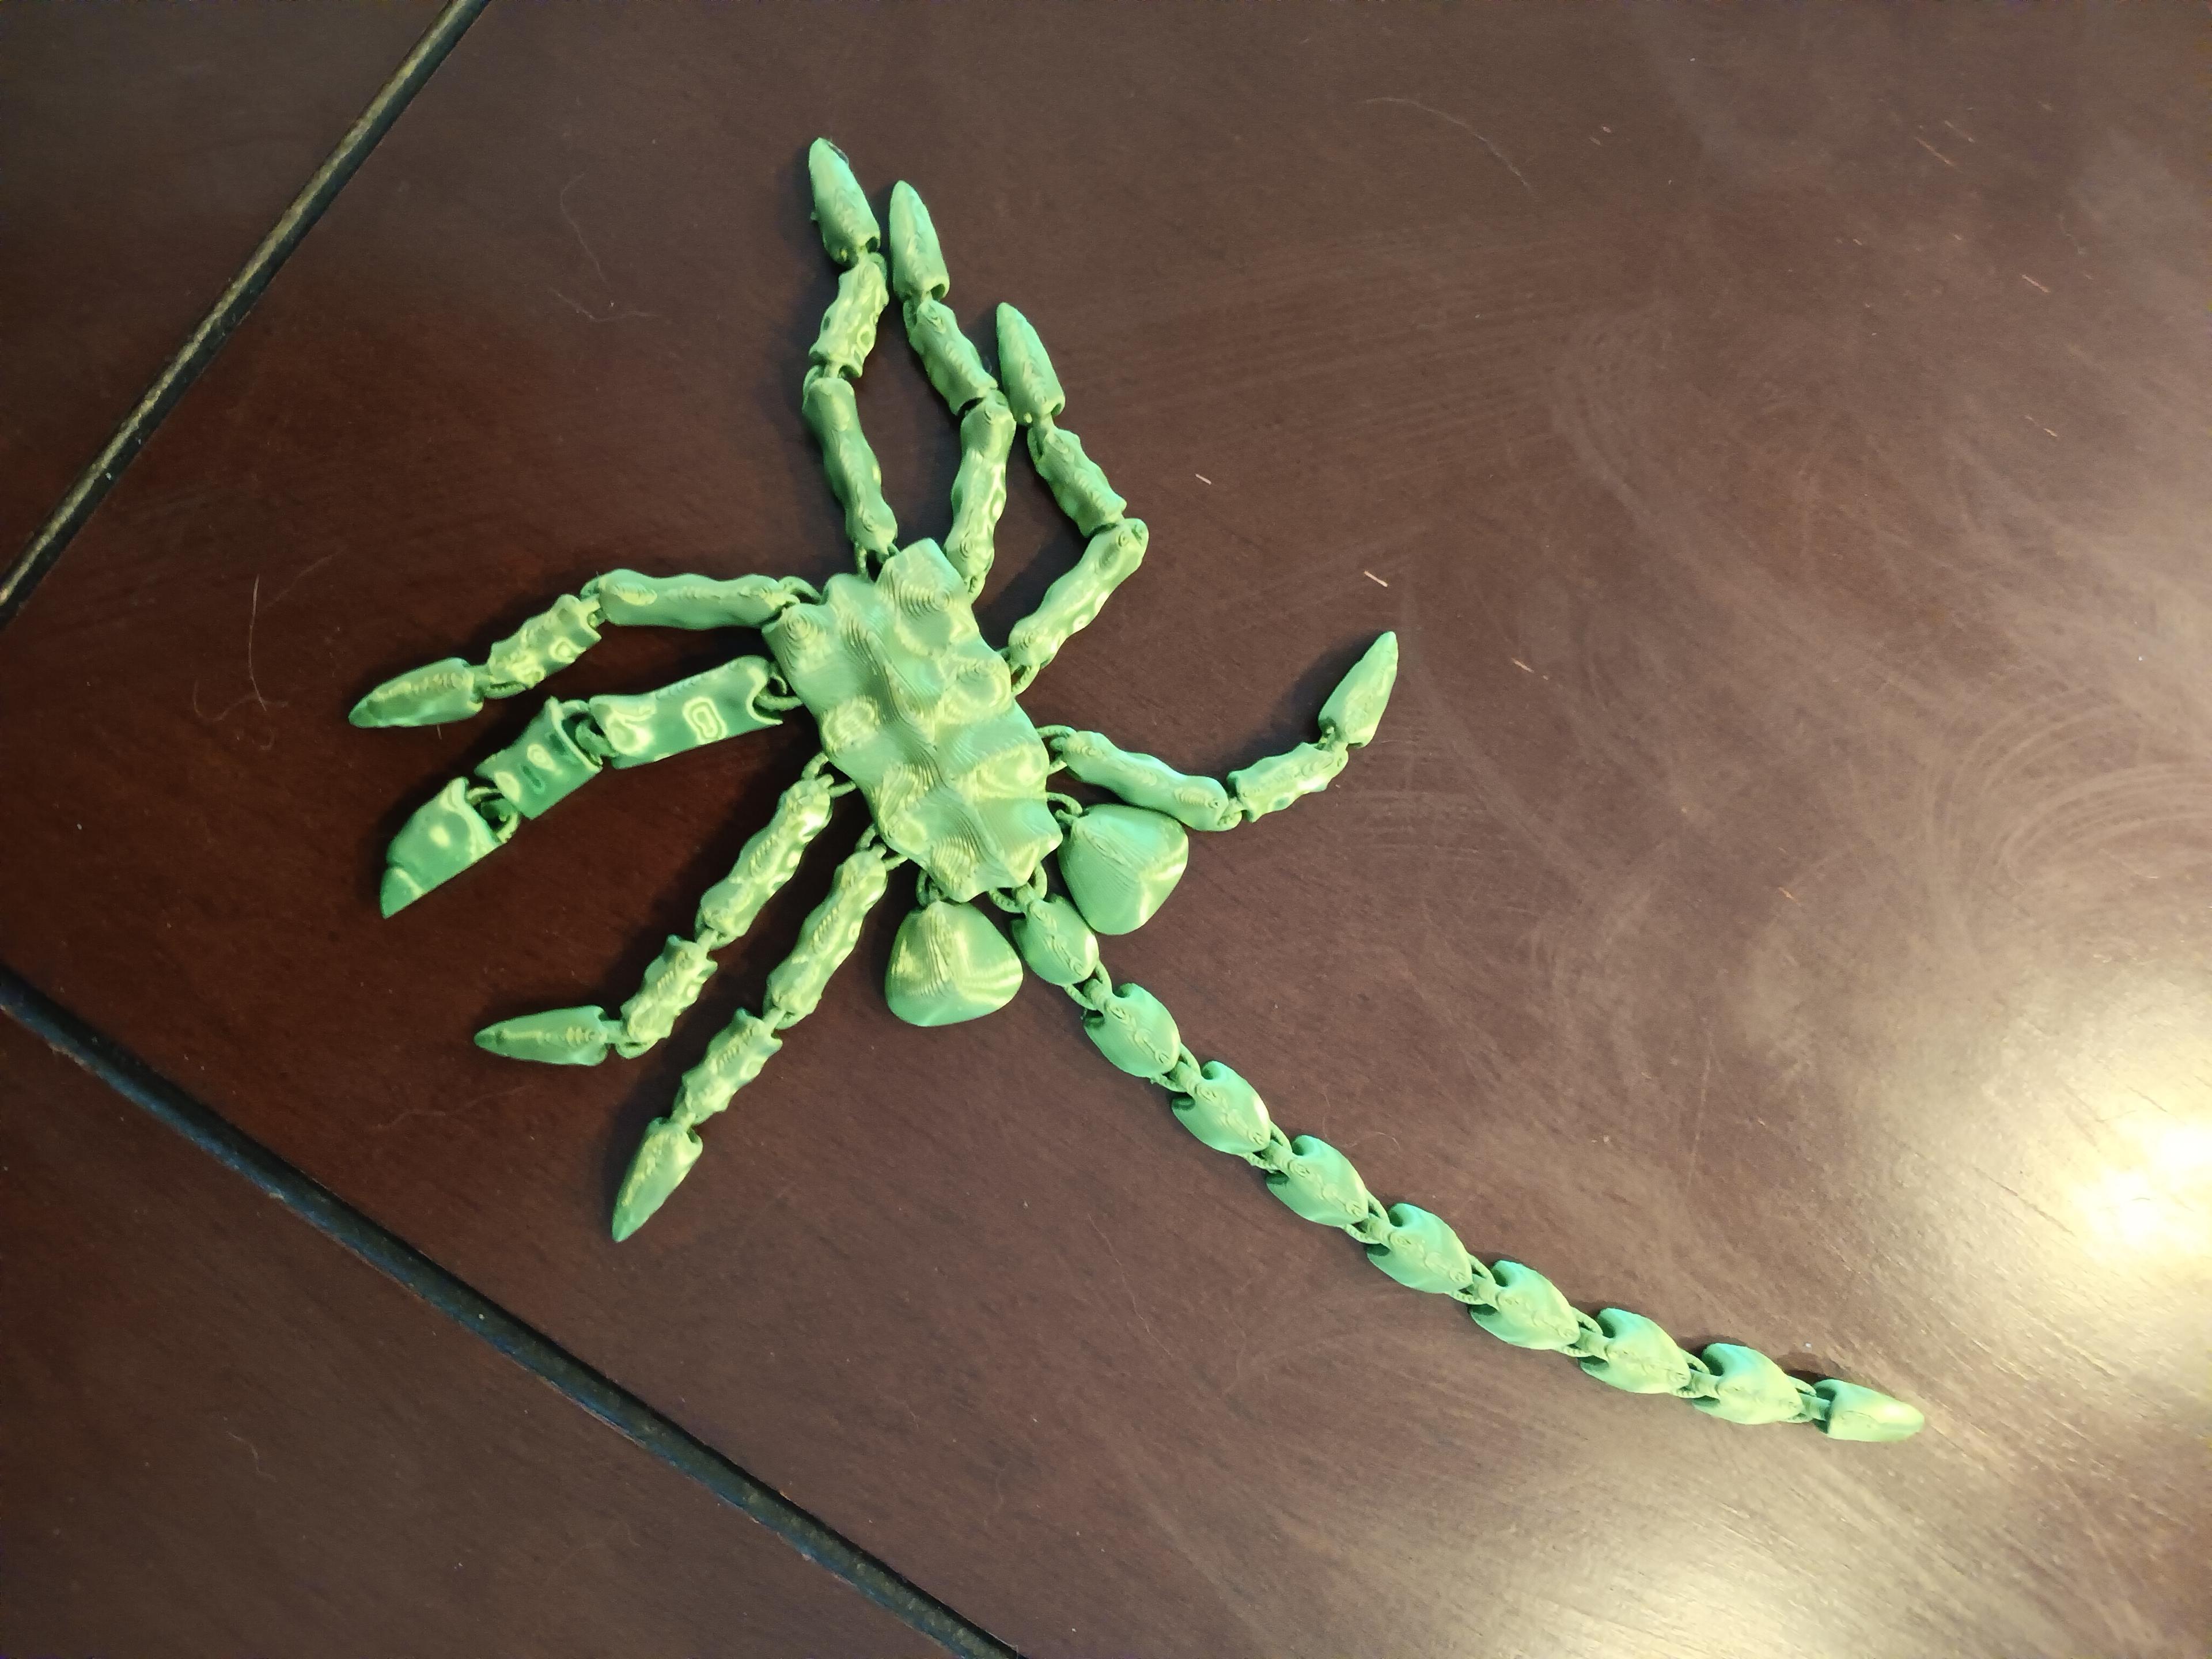 Facehugger is done and up for subscribers  :)